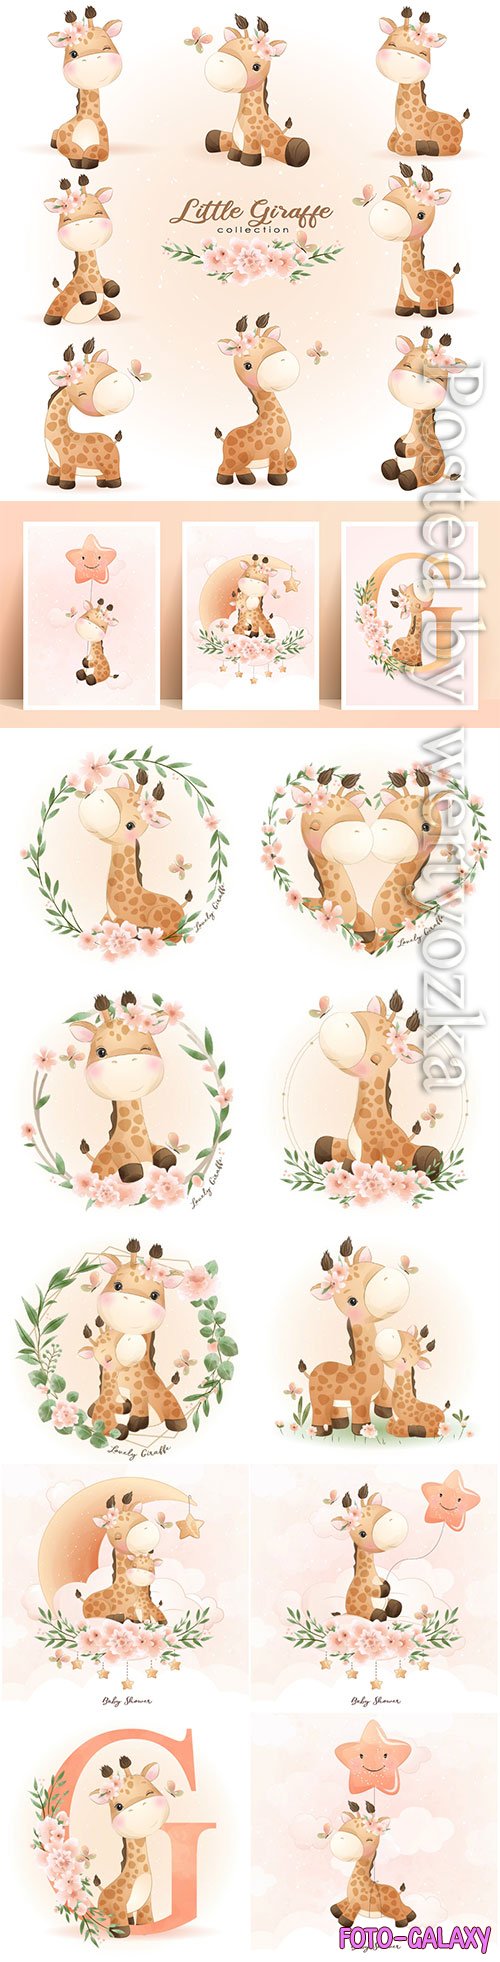 Cute doodle giraffe poses with floral illustration premium vector